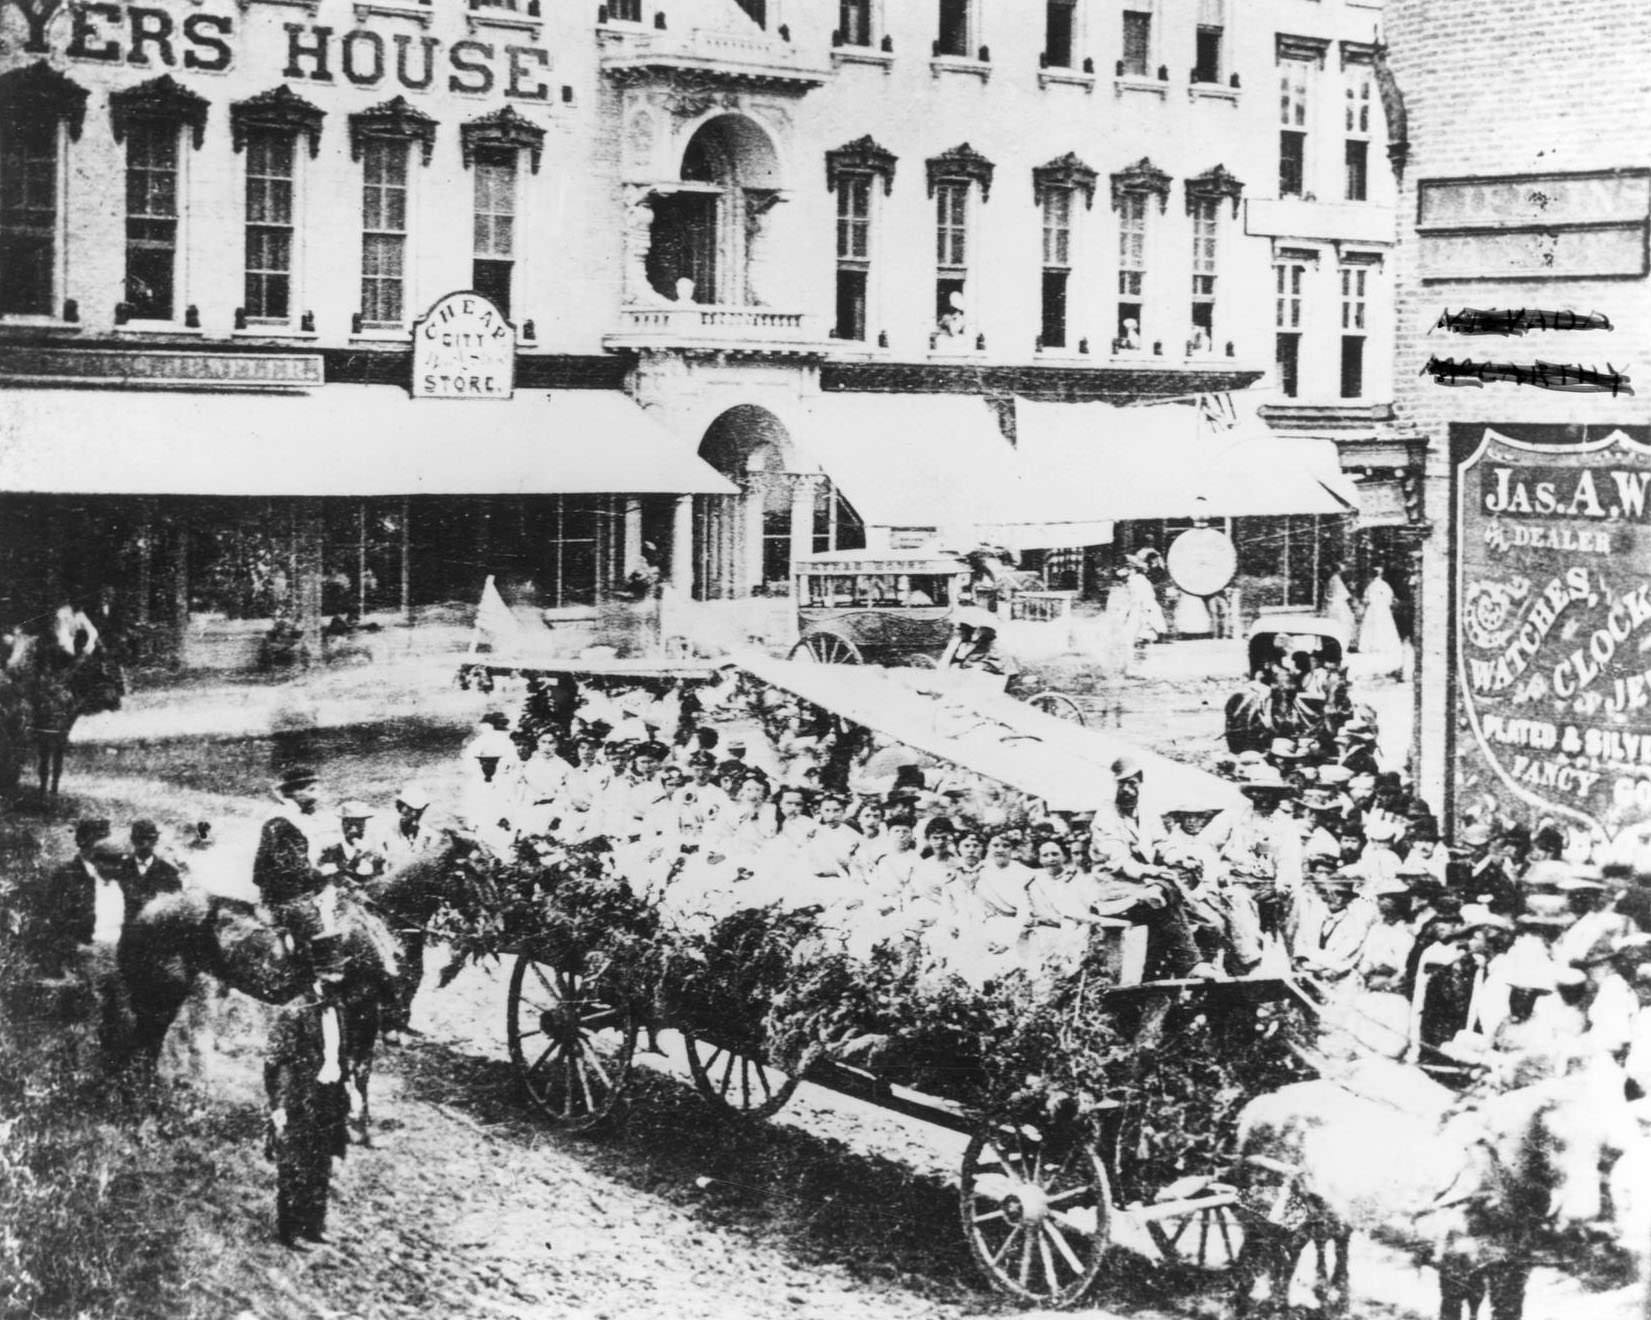 A horse-drawn float full of flower-bedecked women dressed in white riding in an 1869 July 4th parade in front of the Myers House, 1869